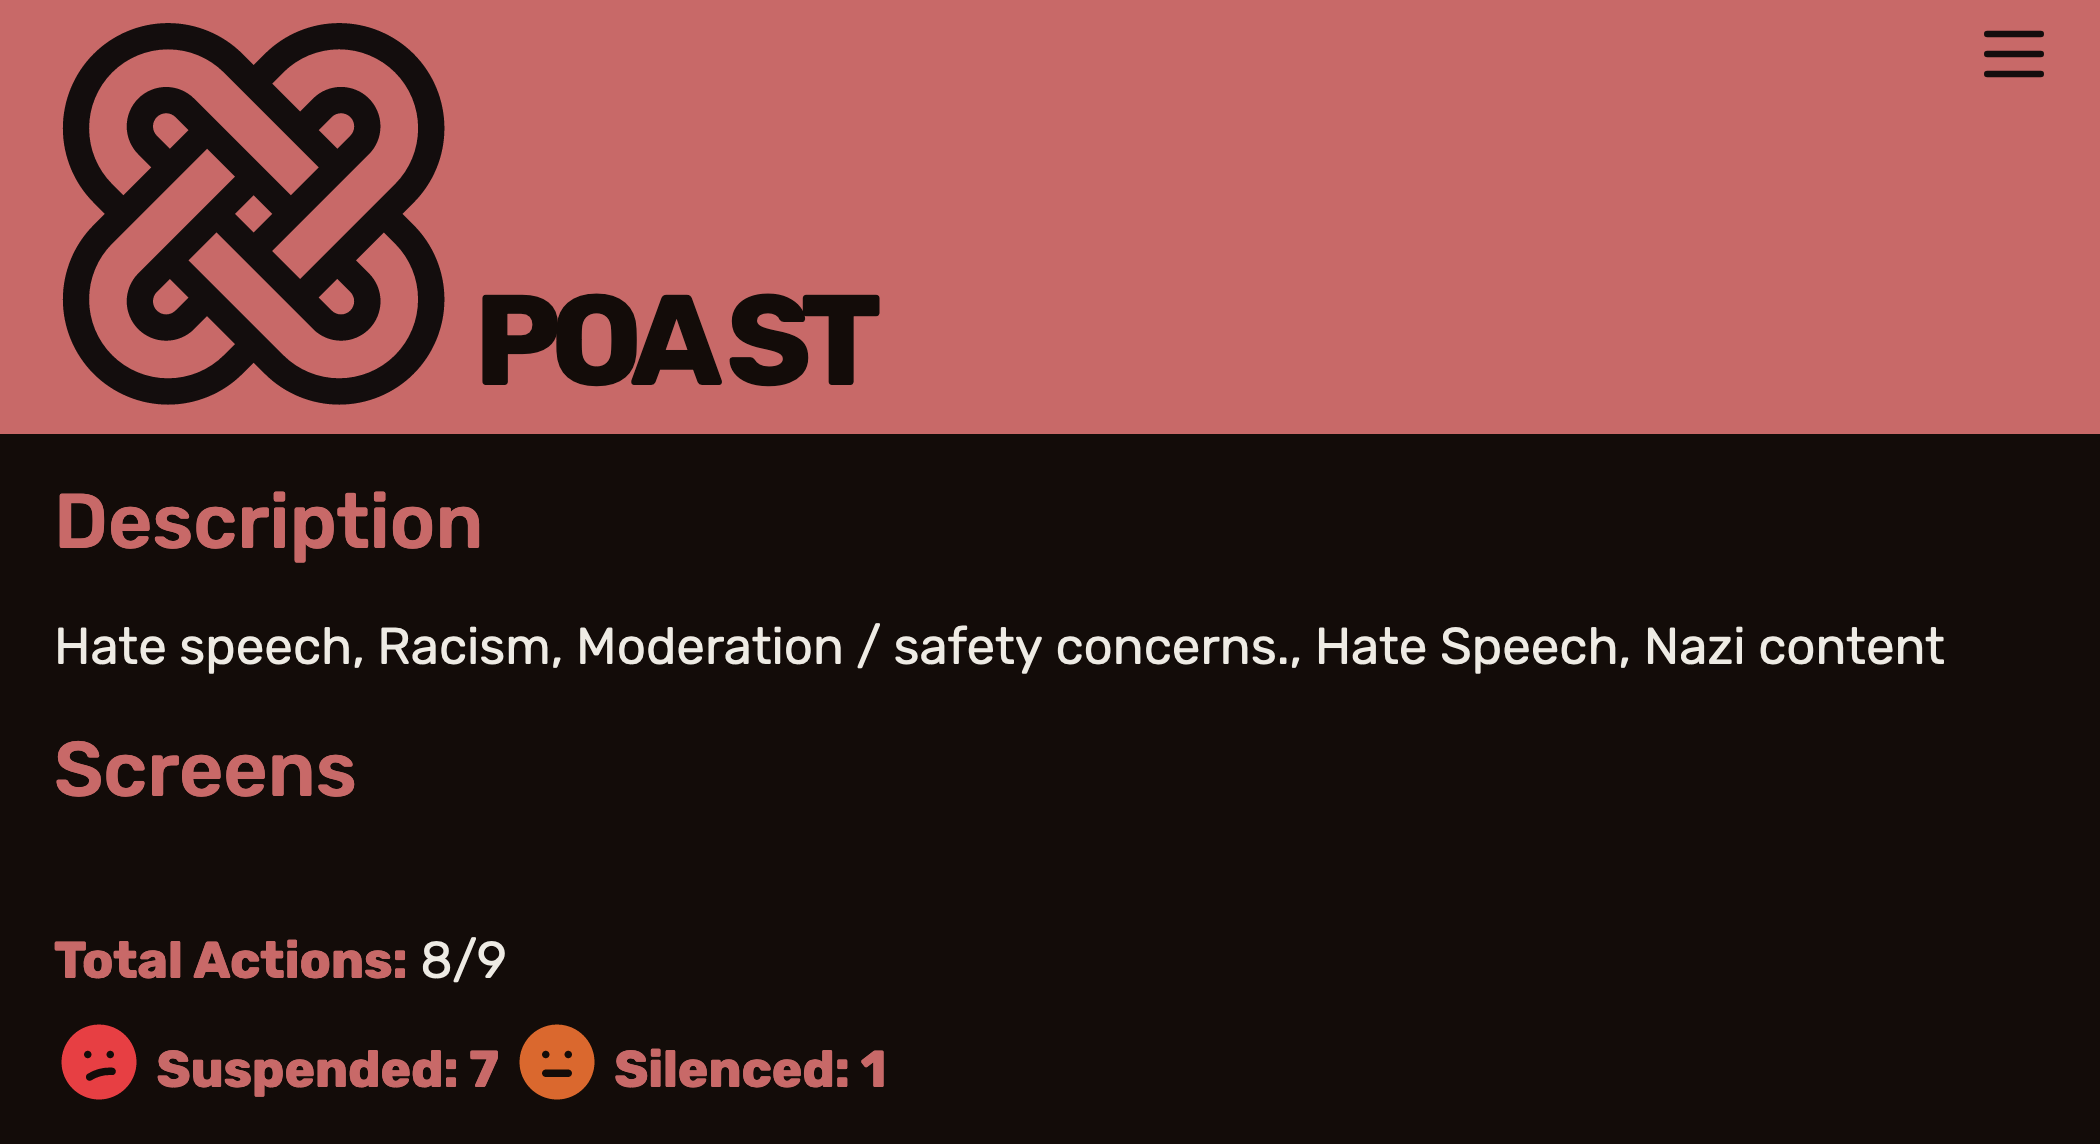 POA ST.  Description: Hate speech, Racism, Moderation / safety concerns., Hate Speech, Nazi content.  Total Actions: 8/9.  Suspended: 7.  Silenced: 1